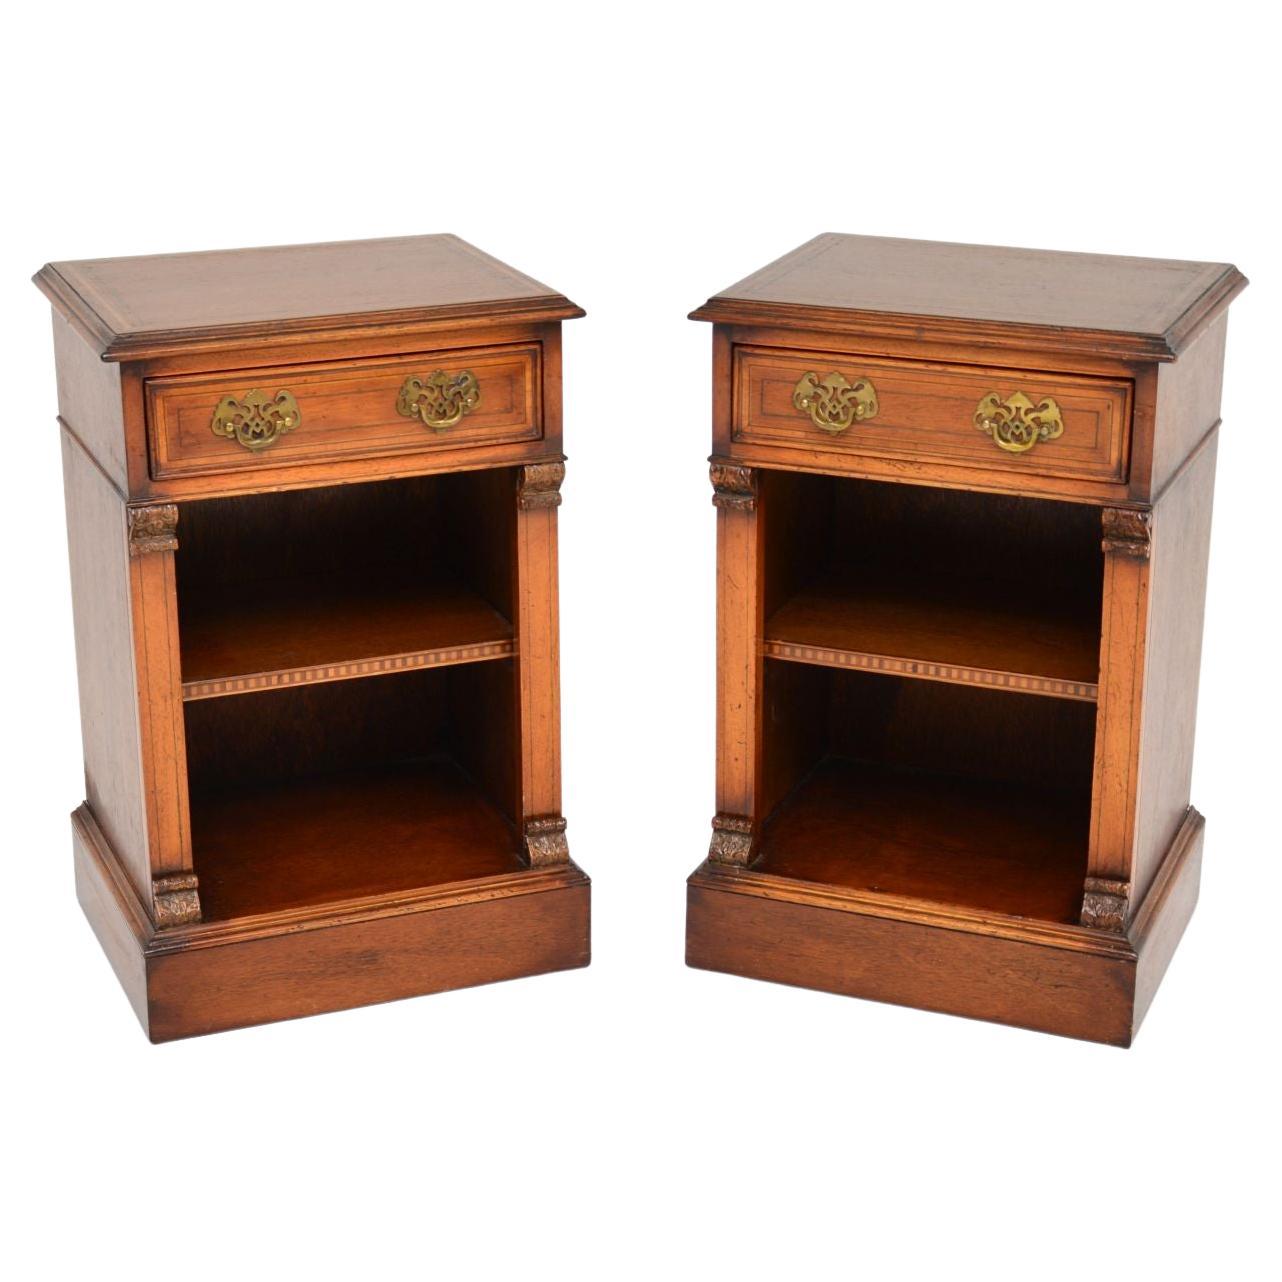 Pair of Antique Inlaid Bedside Cabinets For Sale